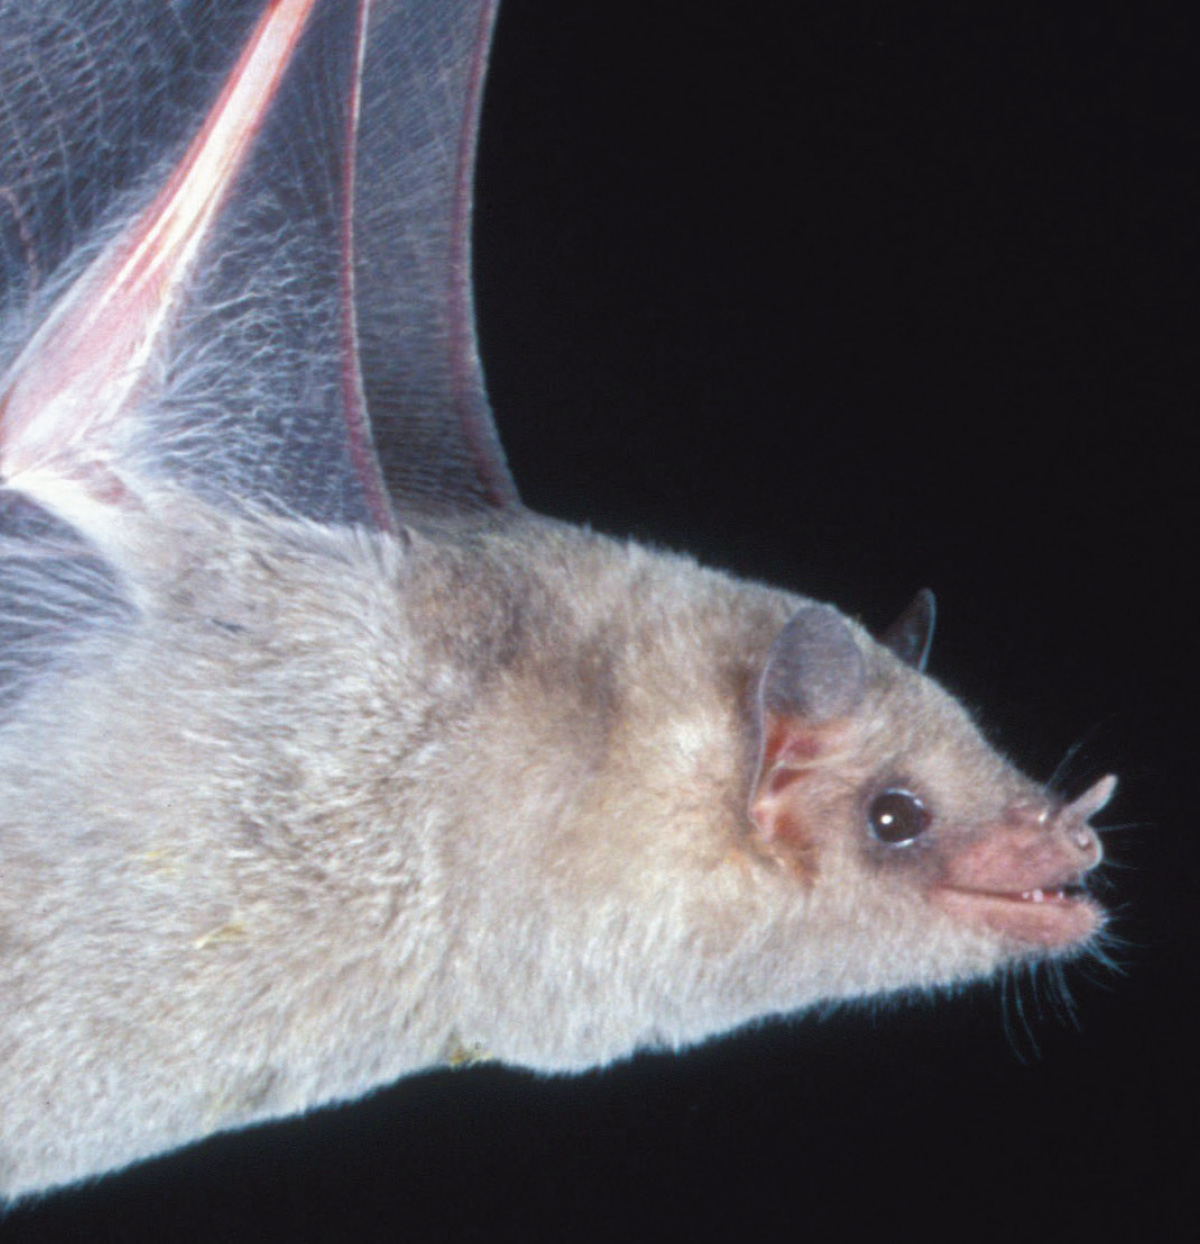 Mexican long-nosed bat